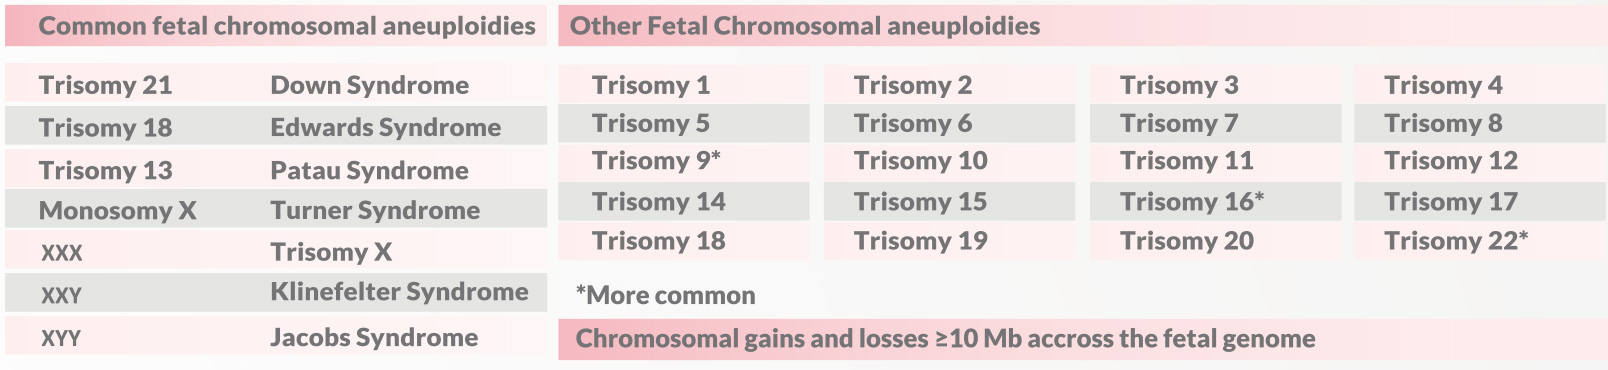 structural chromosomal alterations